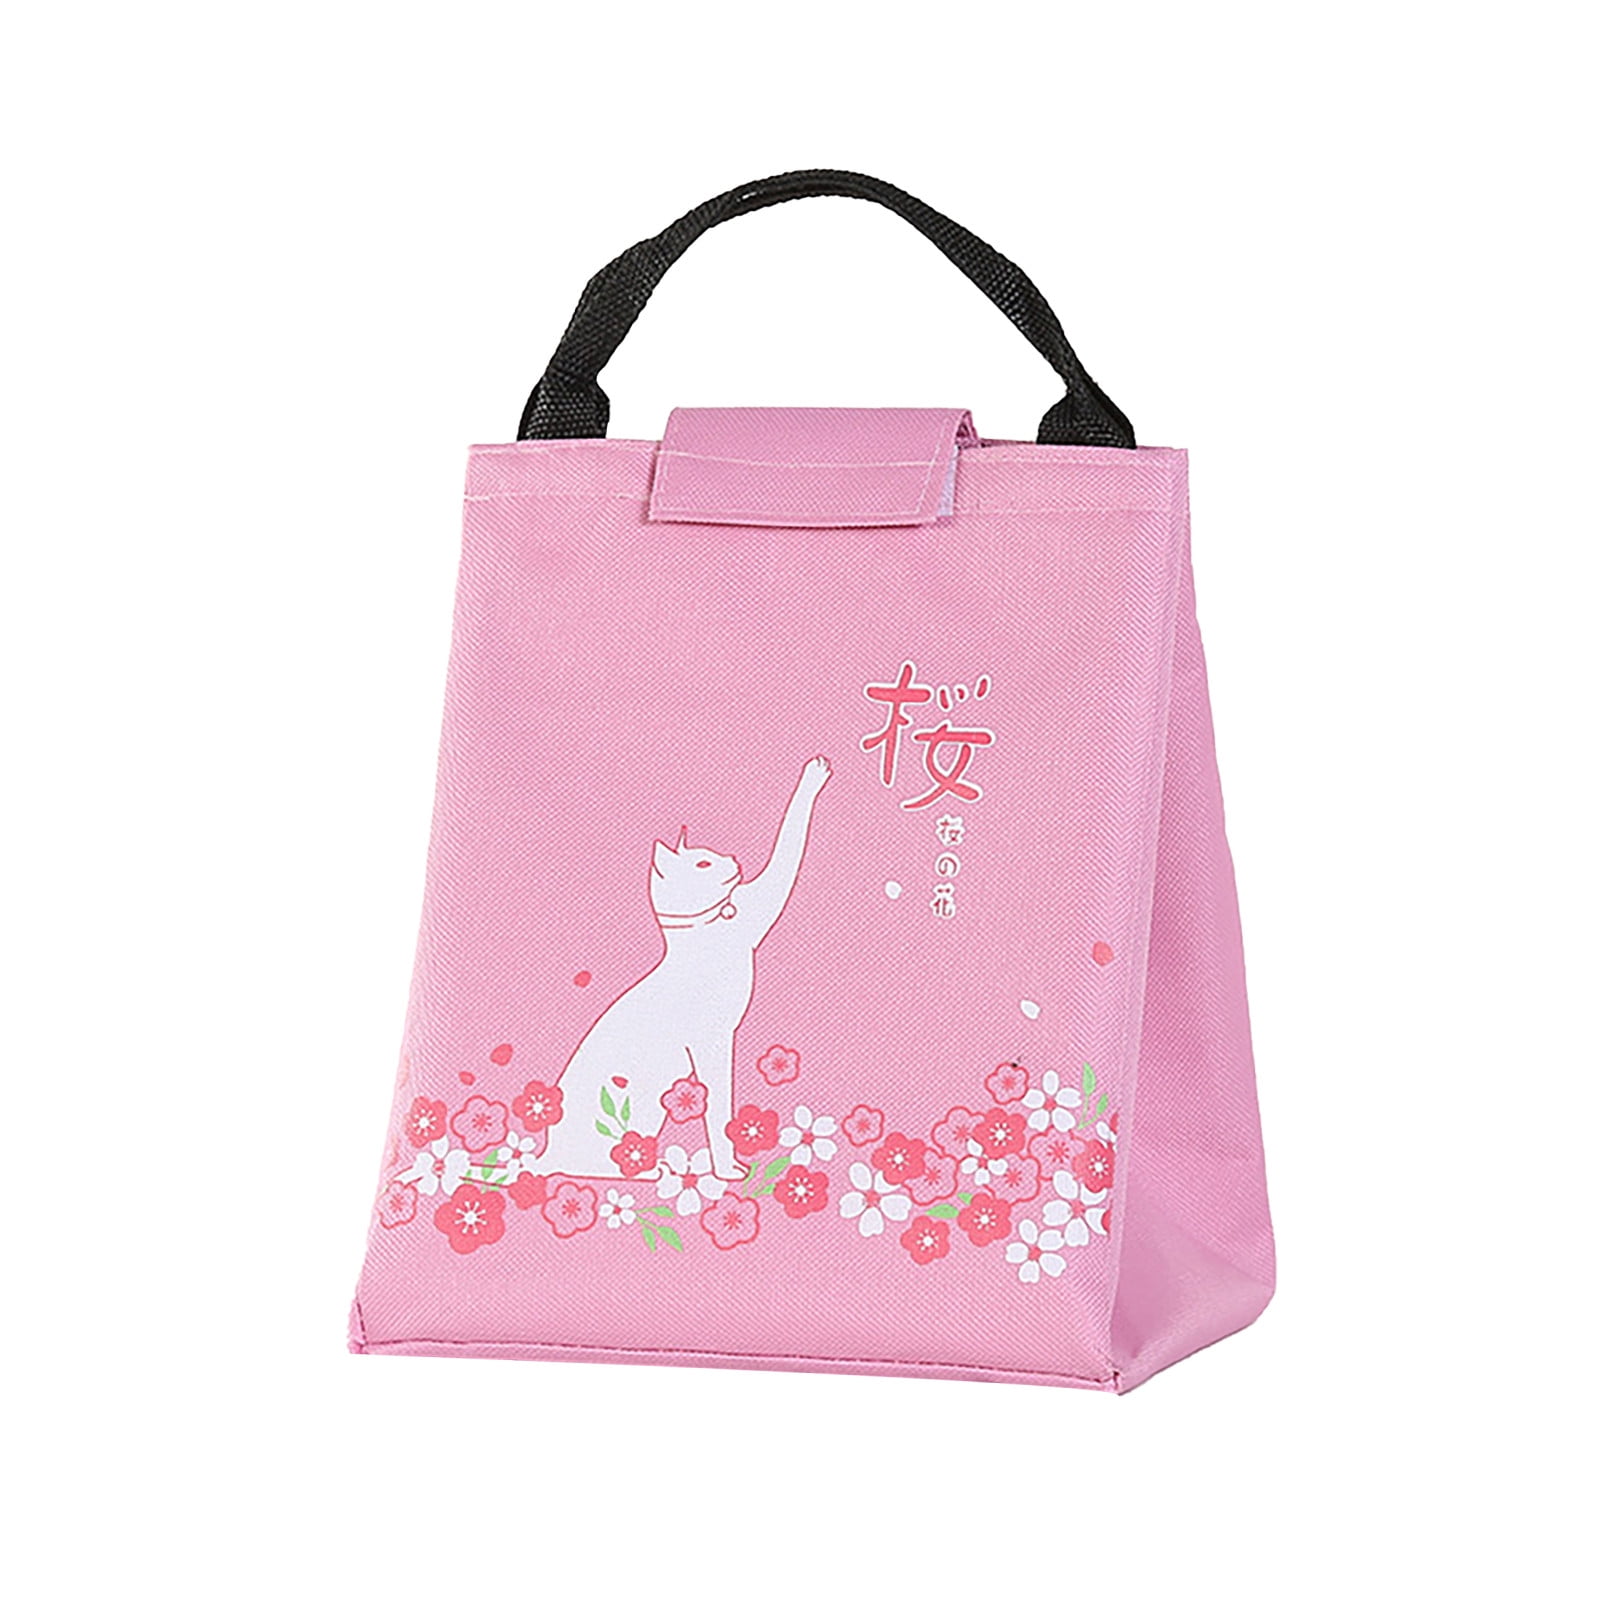 Cute Cartoon Cat Insulated Lunch Bag Thermal Lunchboxes Box School Picnic Travel